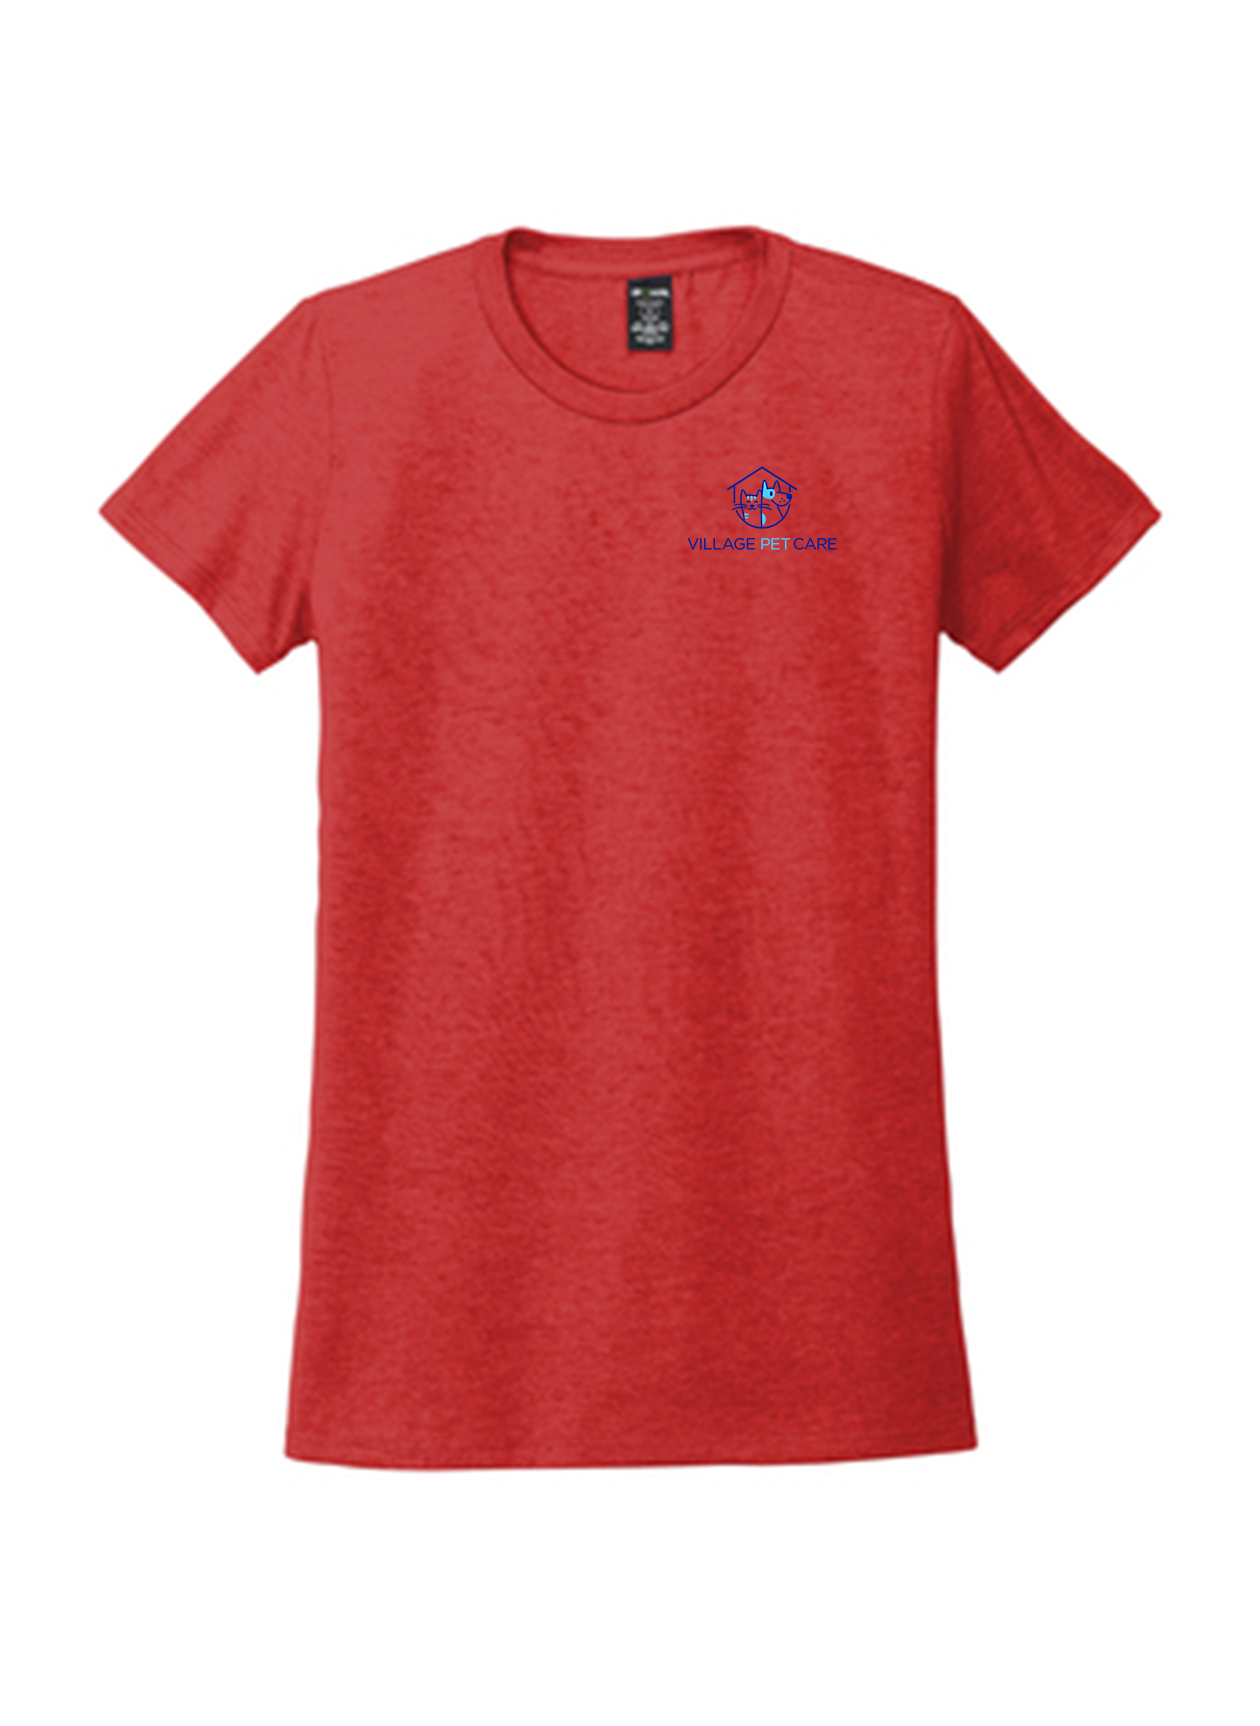 Allmade Women's Tri-Blend Tee, Rise Up Red [Village Pet Care]